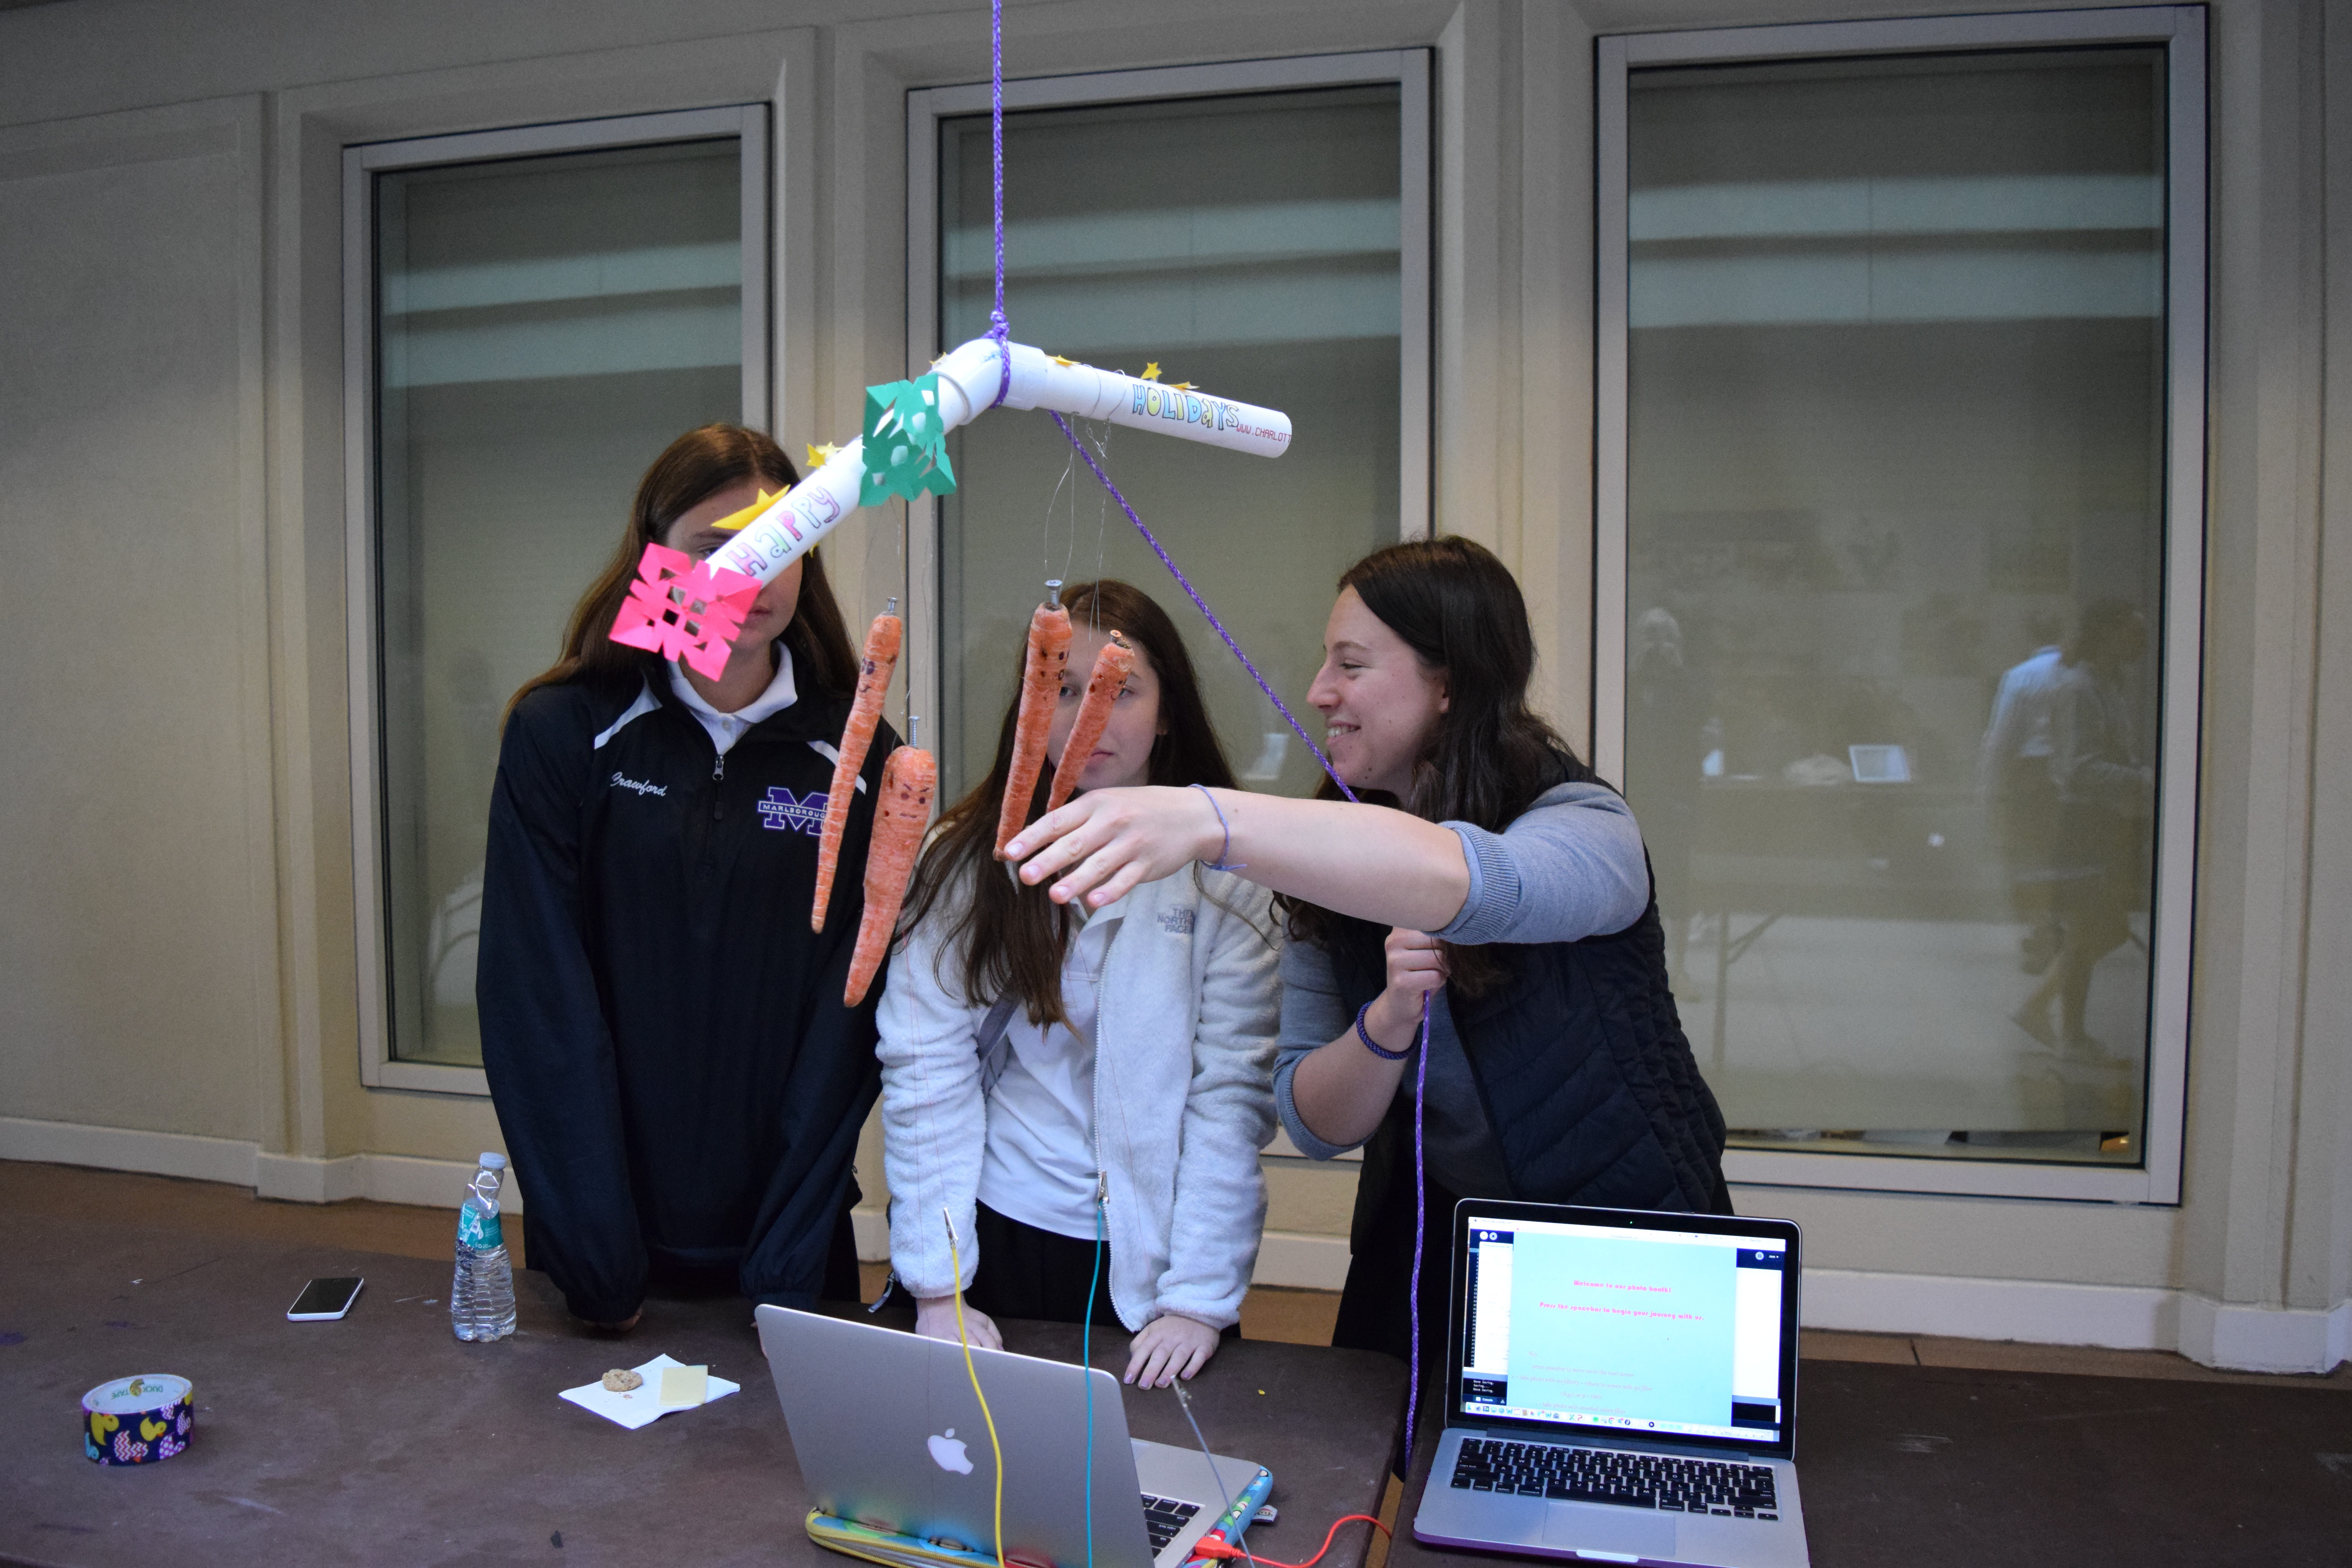 Megan '19, Eve '19 and Rachel '19 demonstrate how to use their carrot wind chime.